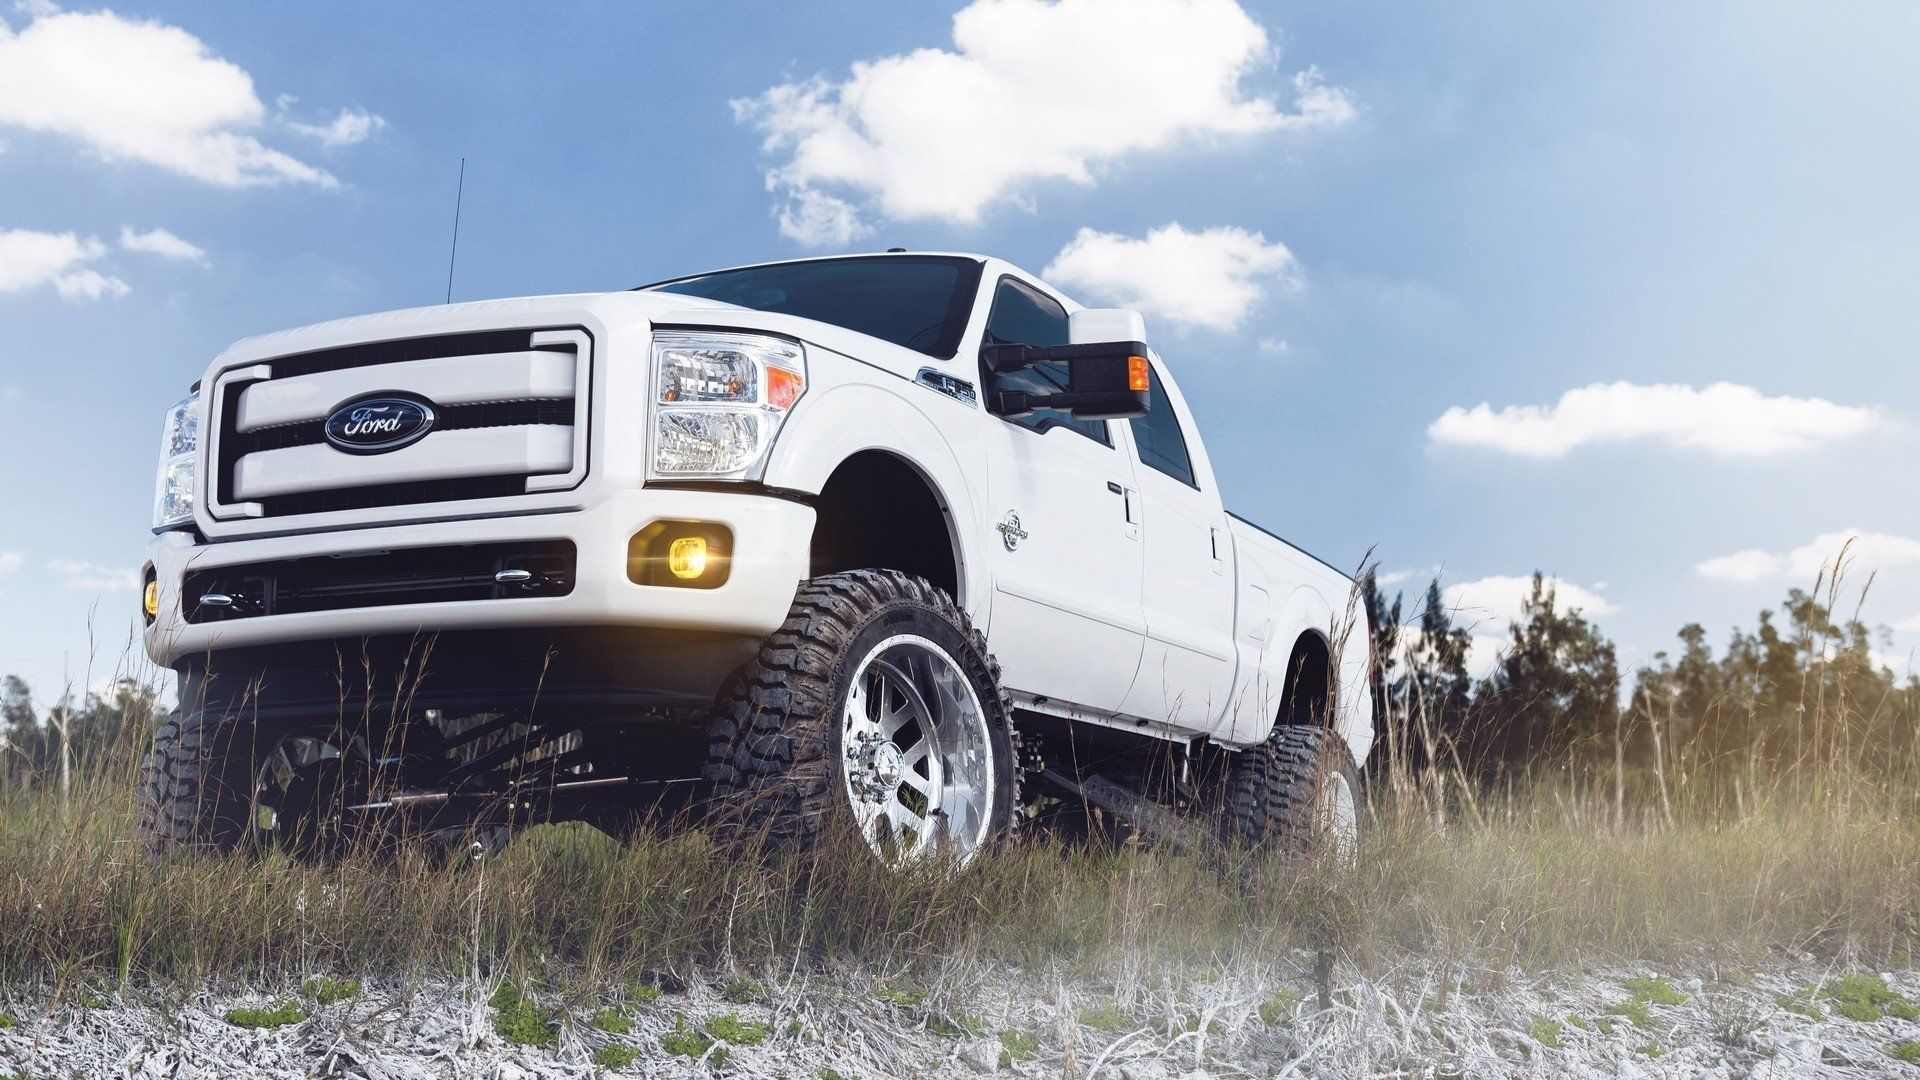 Ford F-250 Super Chief Wallpapers